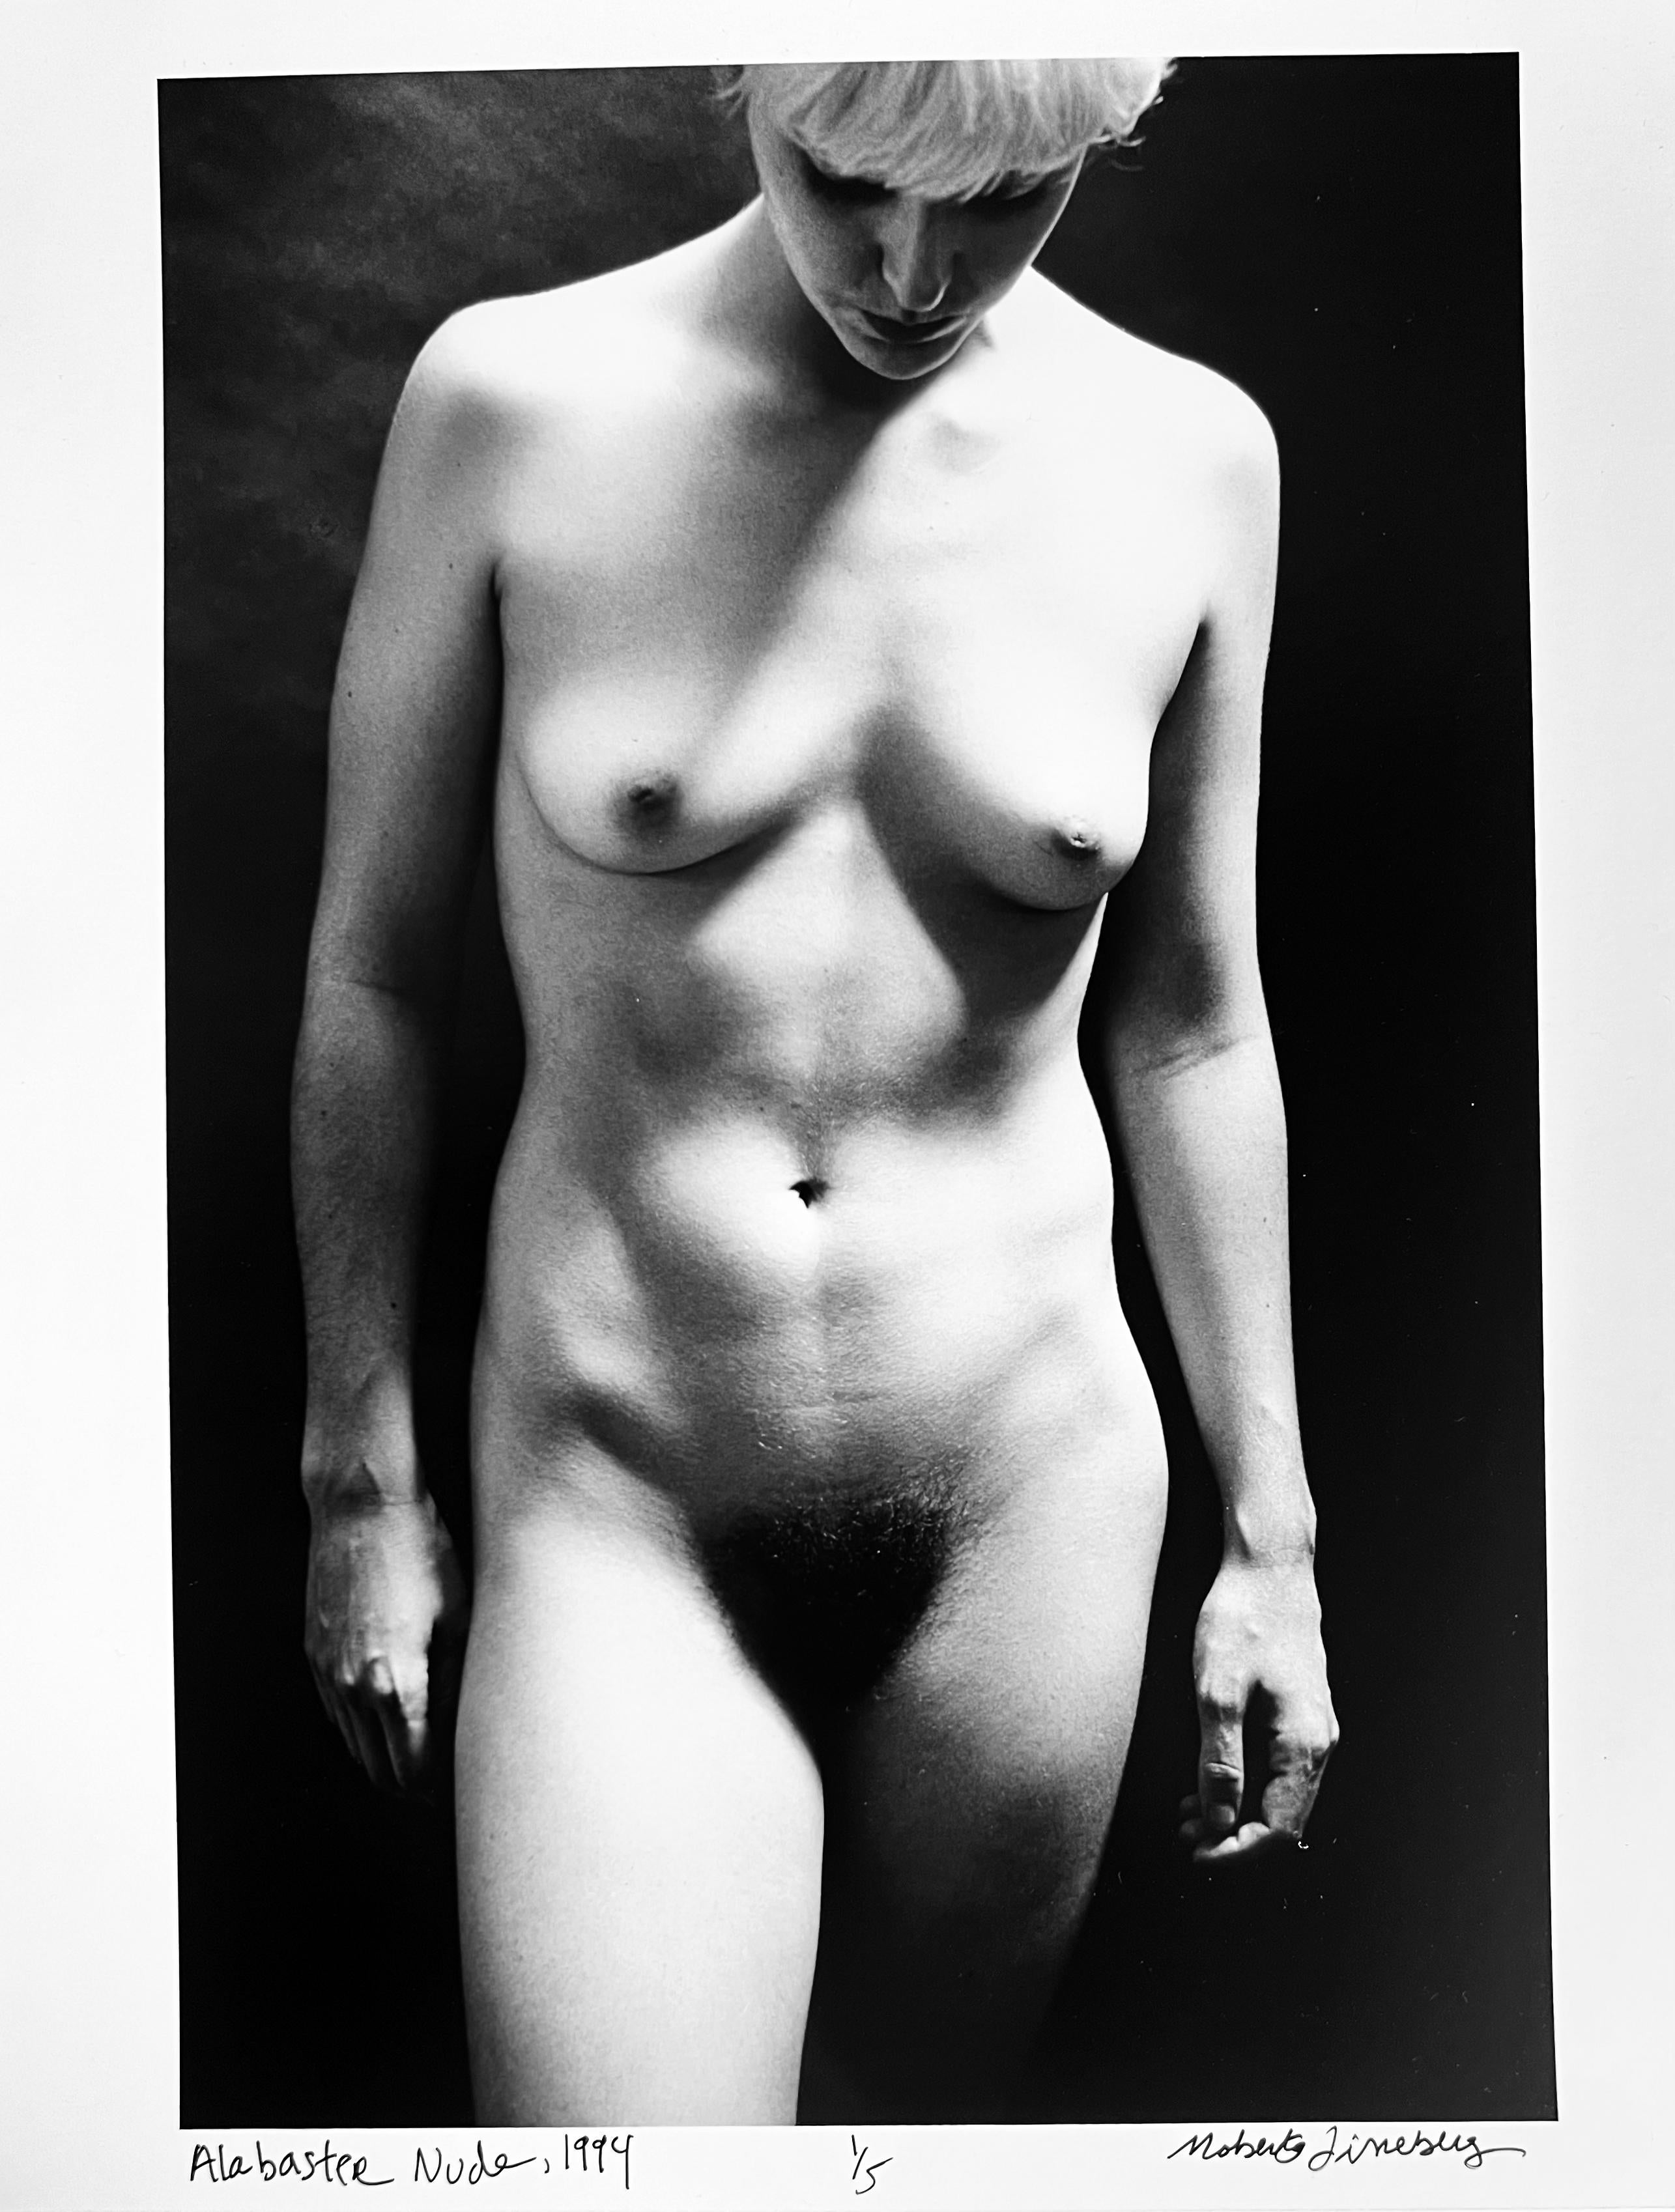 Roberta Fineberg Nude Photograph - Alabaster Nude, New York, Black and White Photograph of  Female Nude in Studio